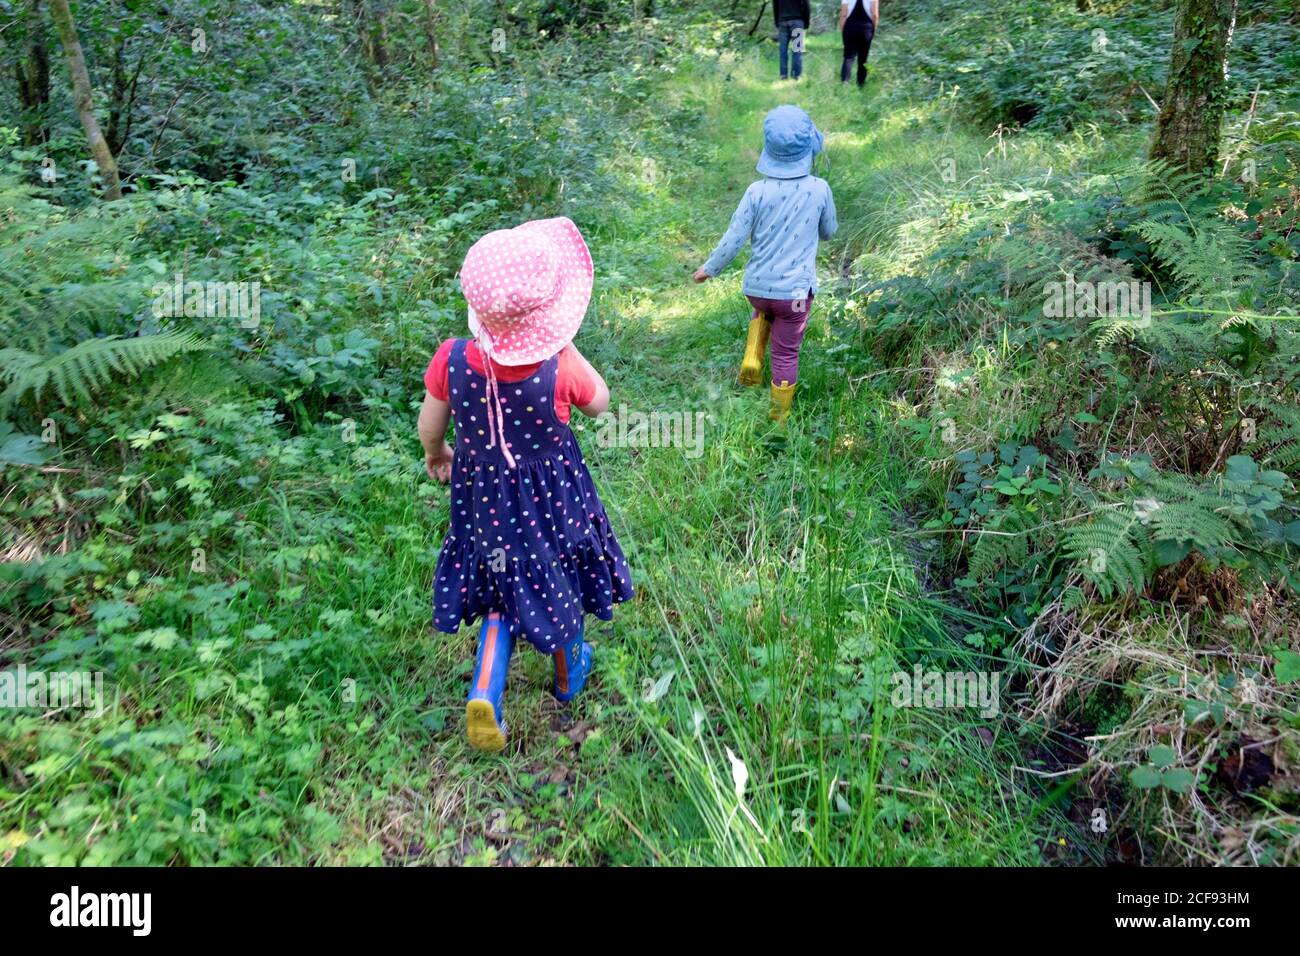 Children kids back rear view walking on a grassy path with adults through an overgrown woodland on holiday in summer Wales UK KATHY DEWITT Stock Photo